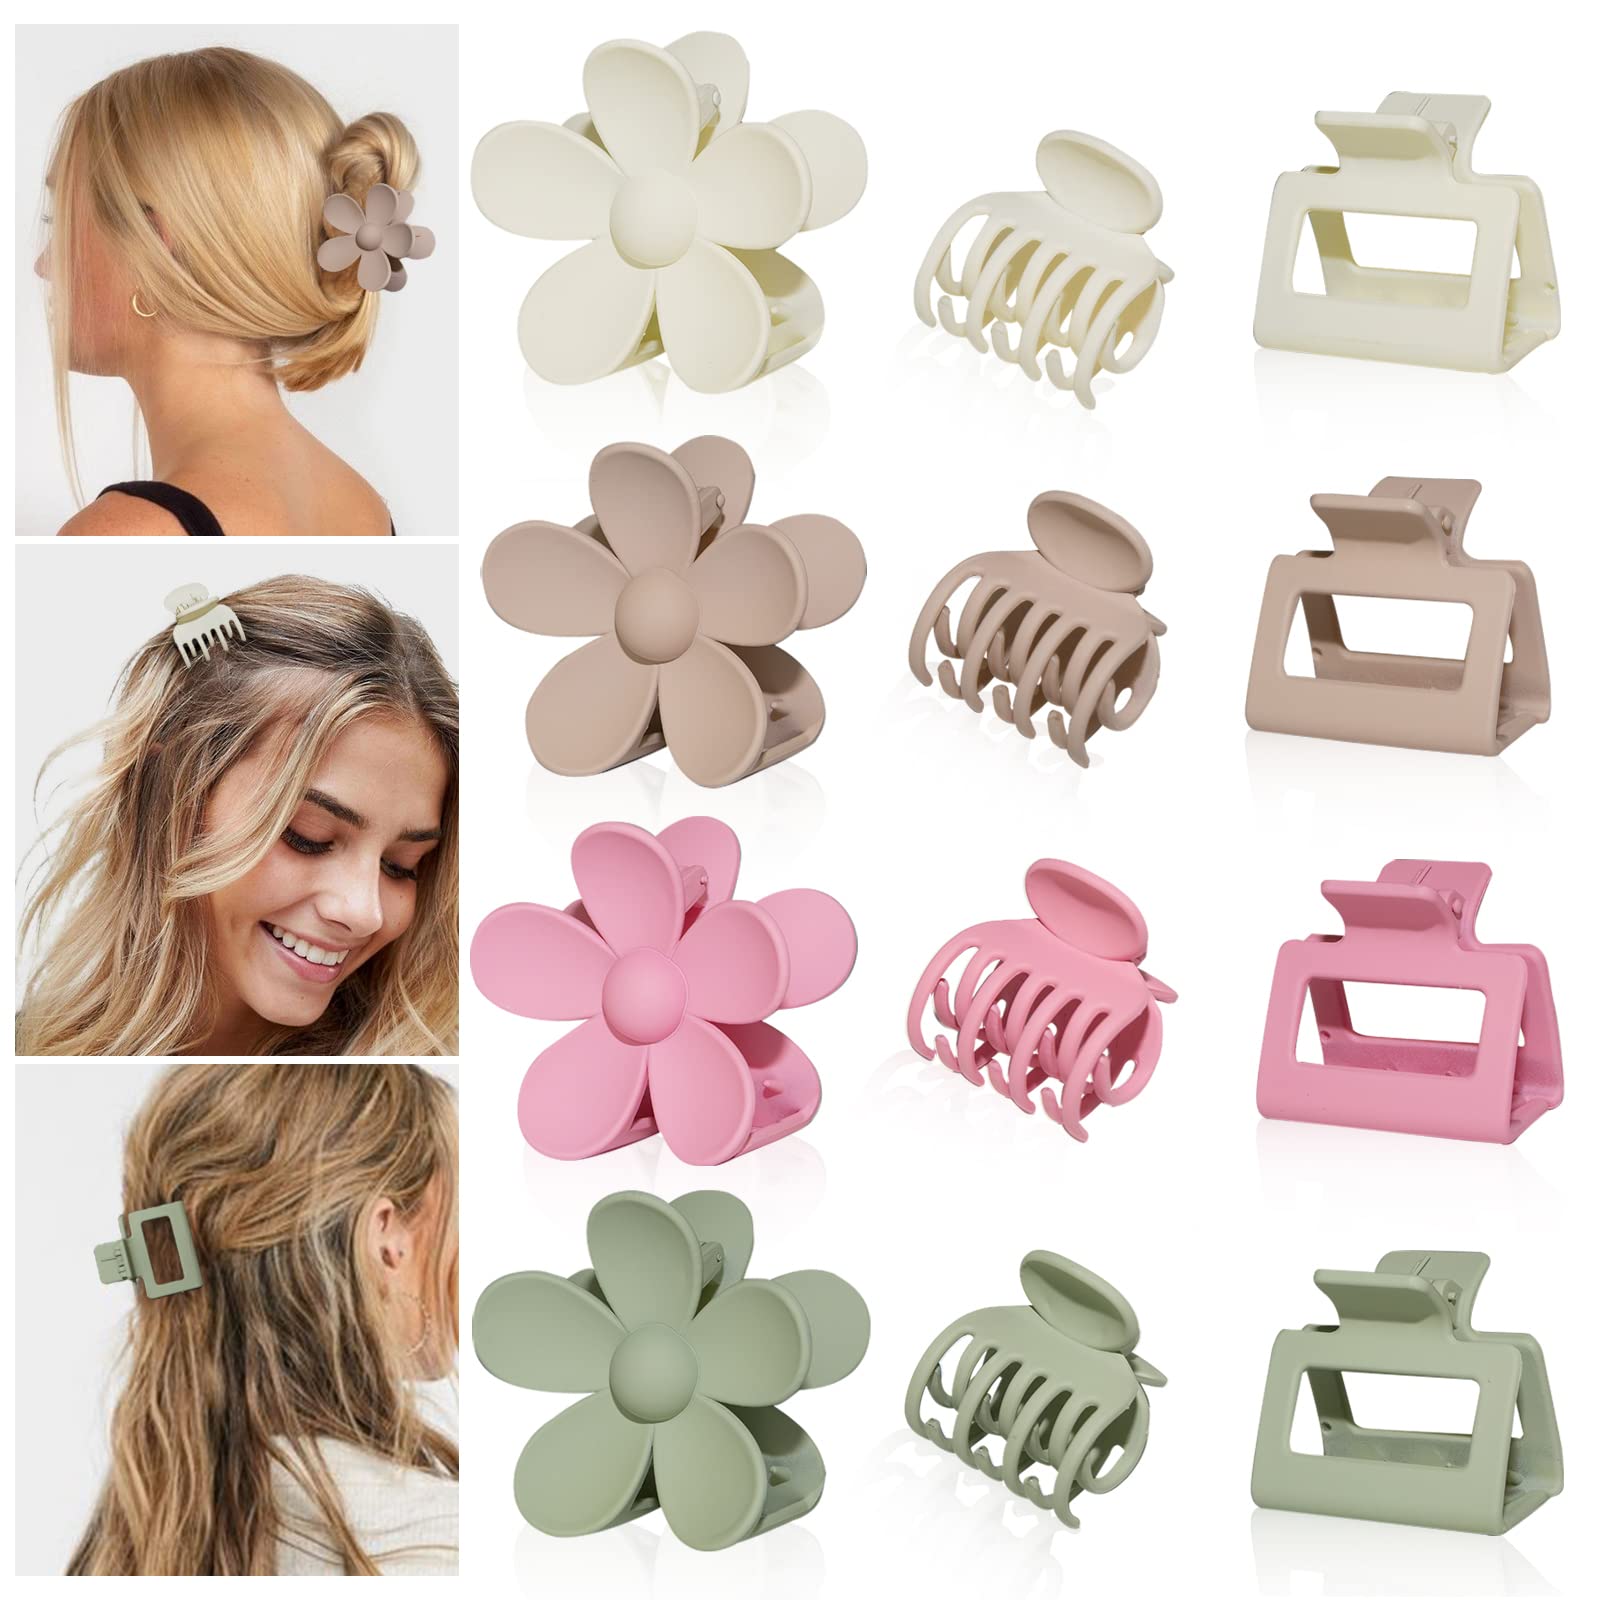 Cute Claw Clip Hairstyle - Stylish Life for Moms